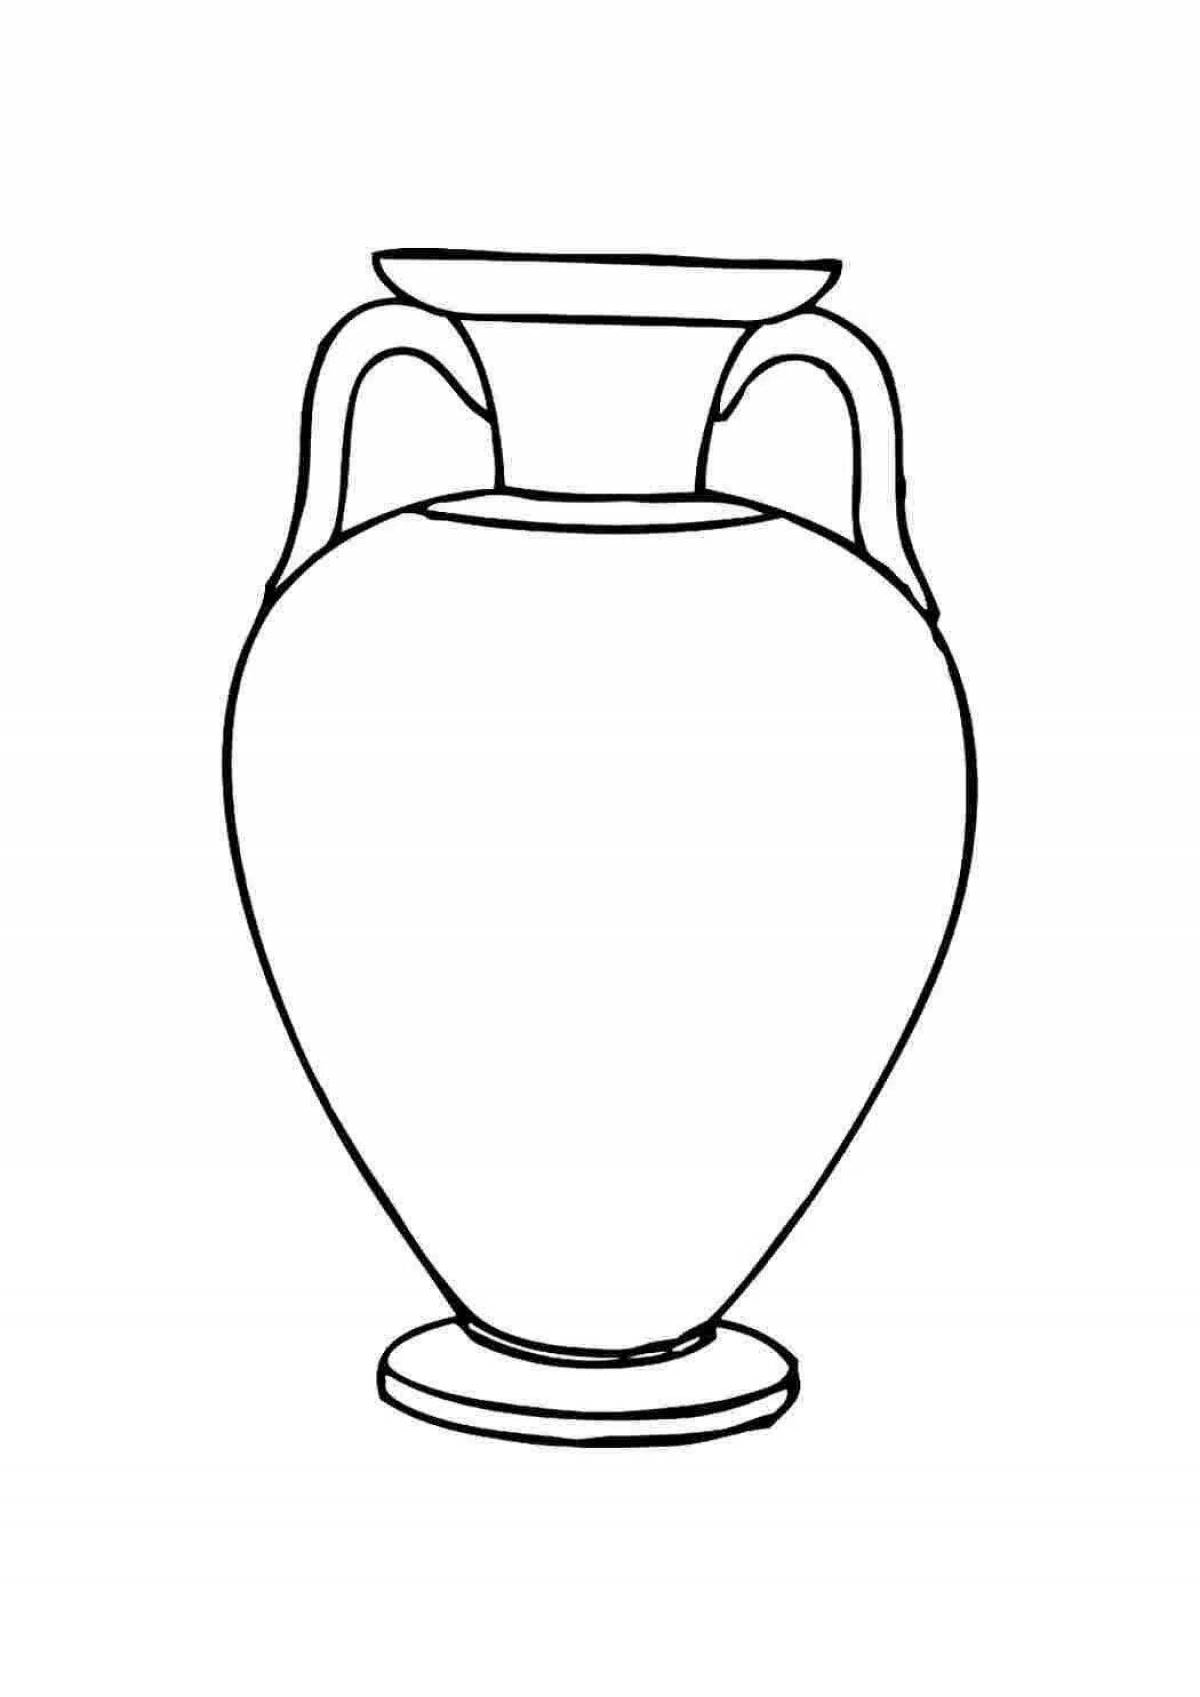 Bright horon coloring page